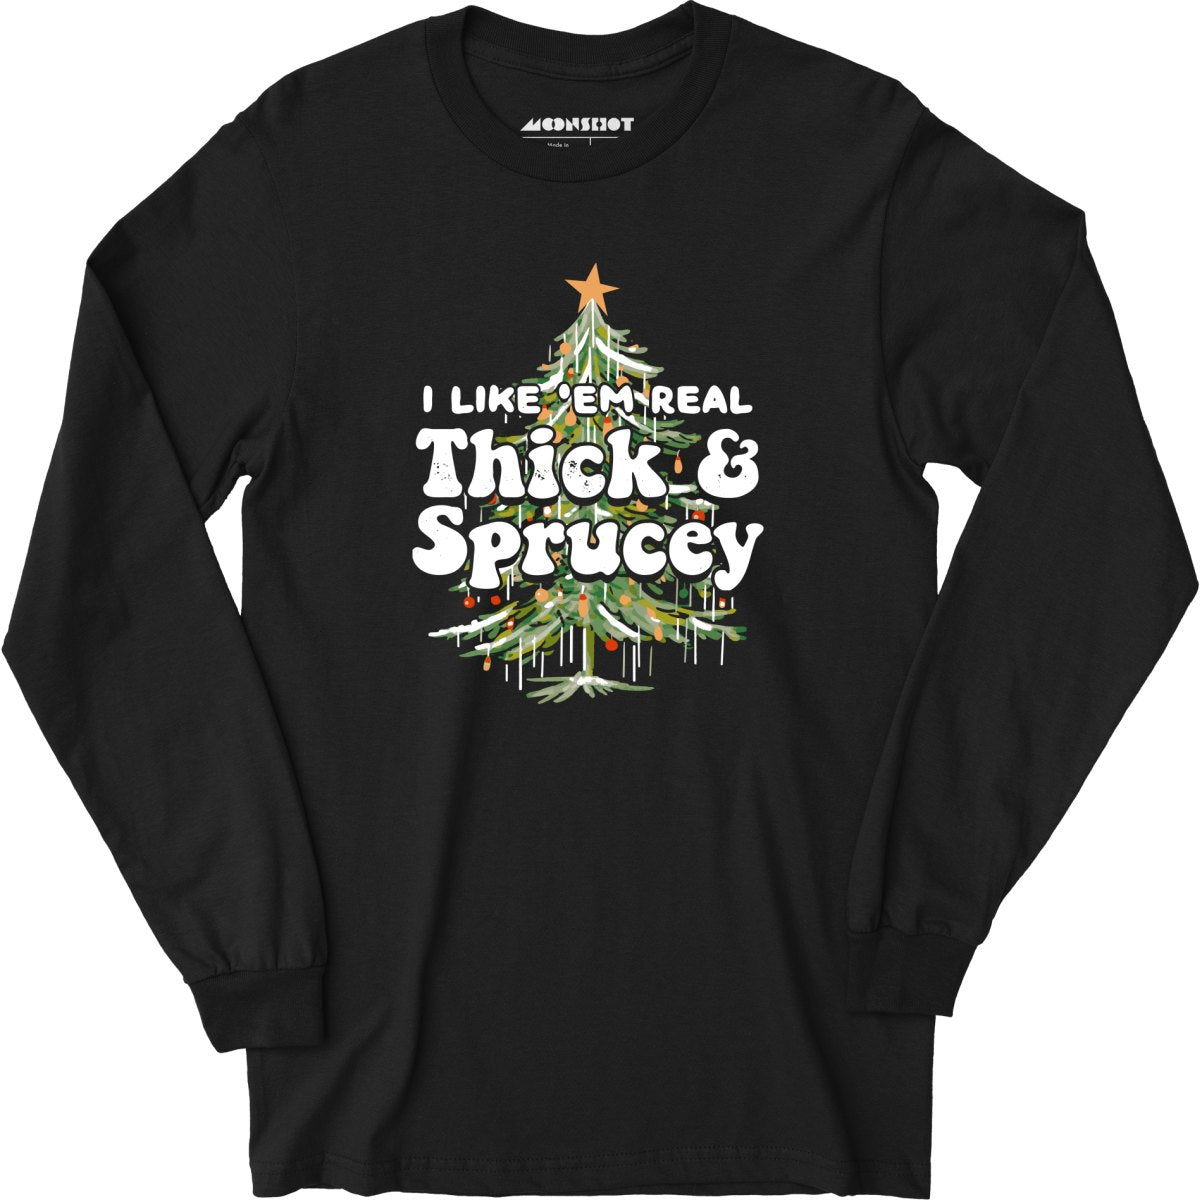 I Like em Real Thick and Sprucey - Long Sleeve T-Shirt